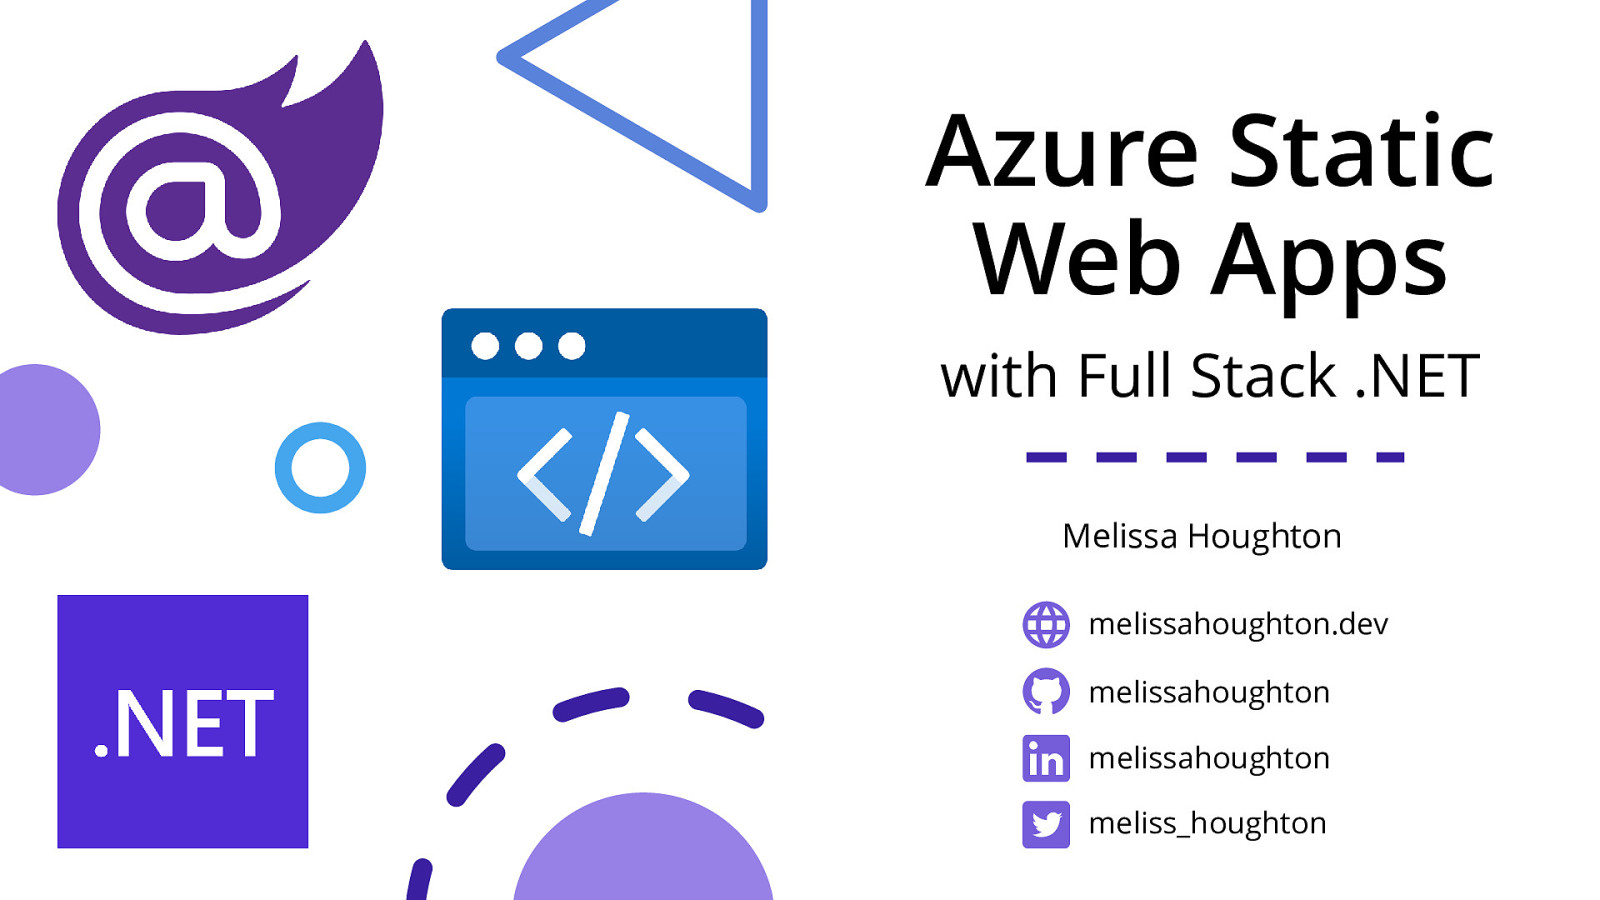 Azure Static Web Apps with Full Stack .NET